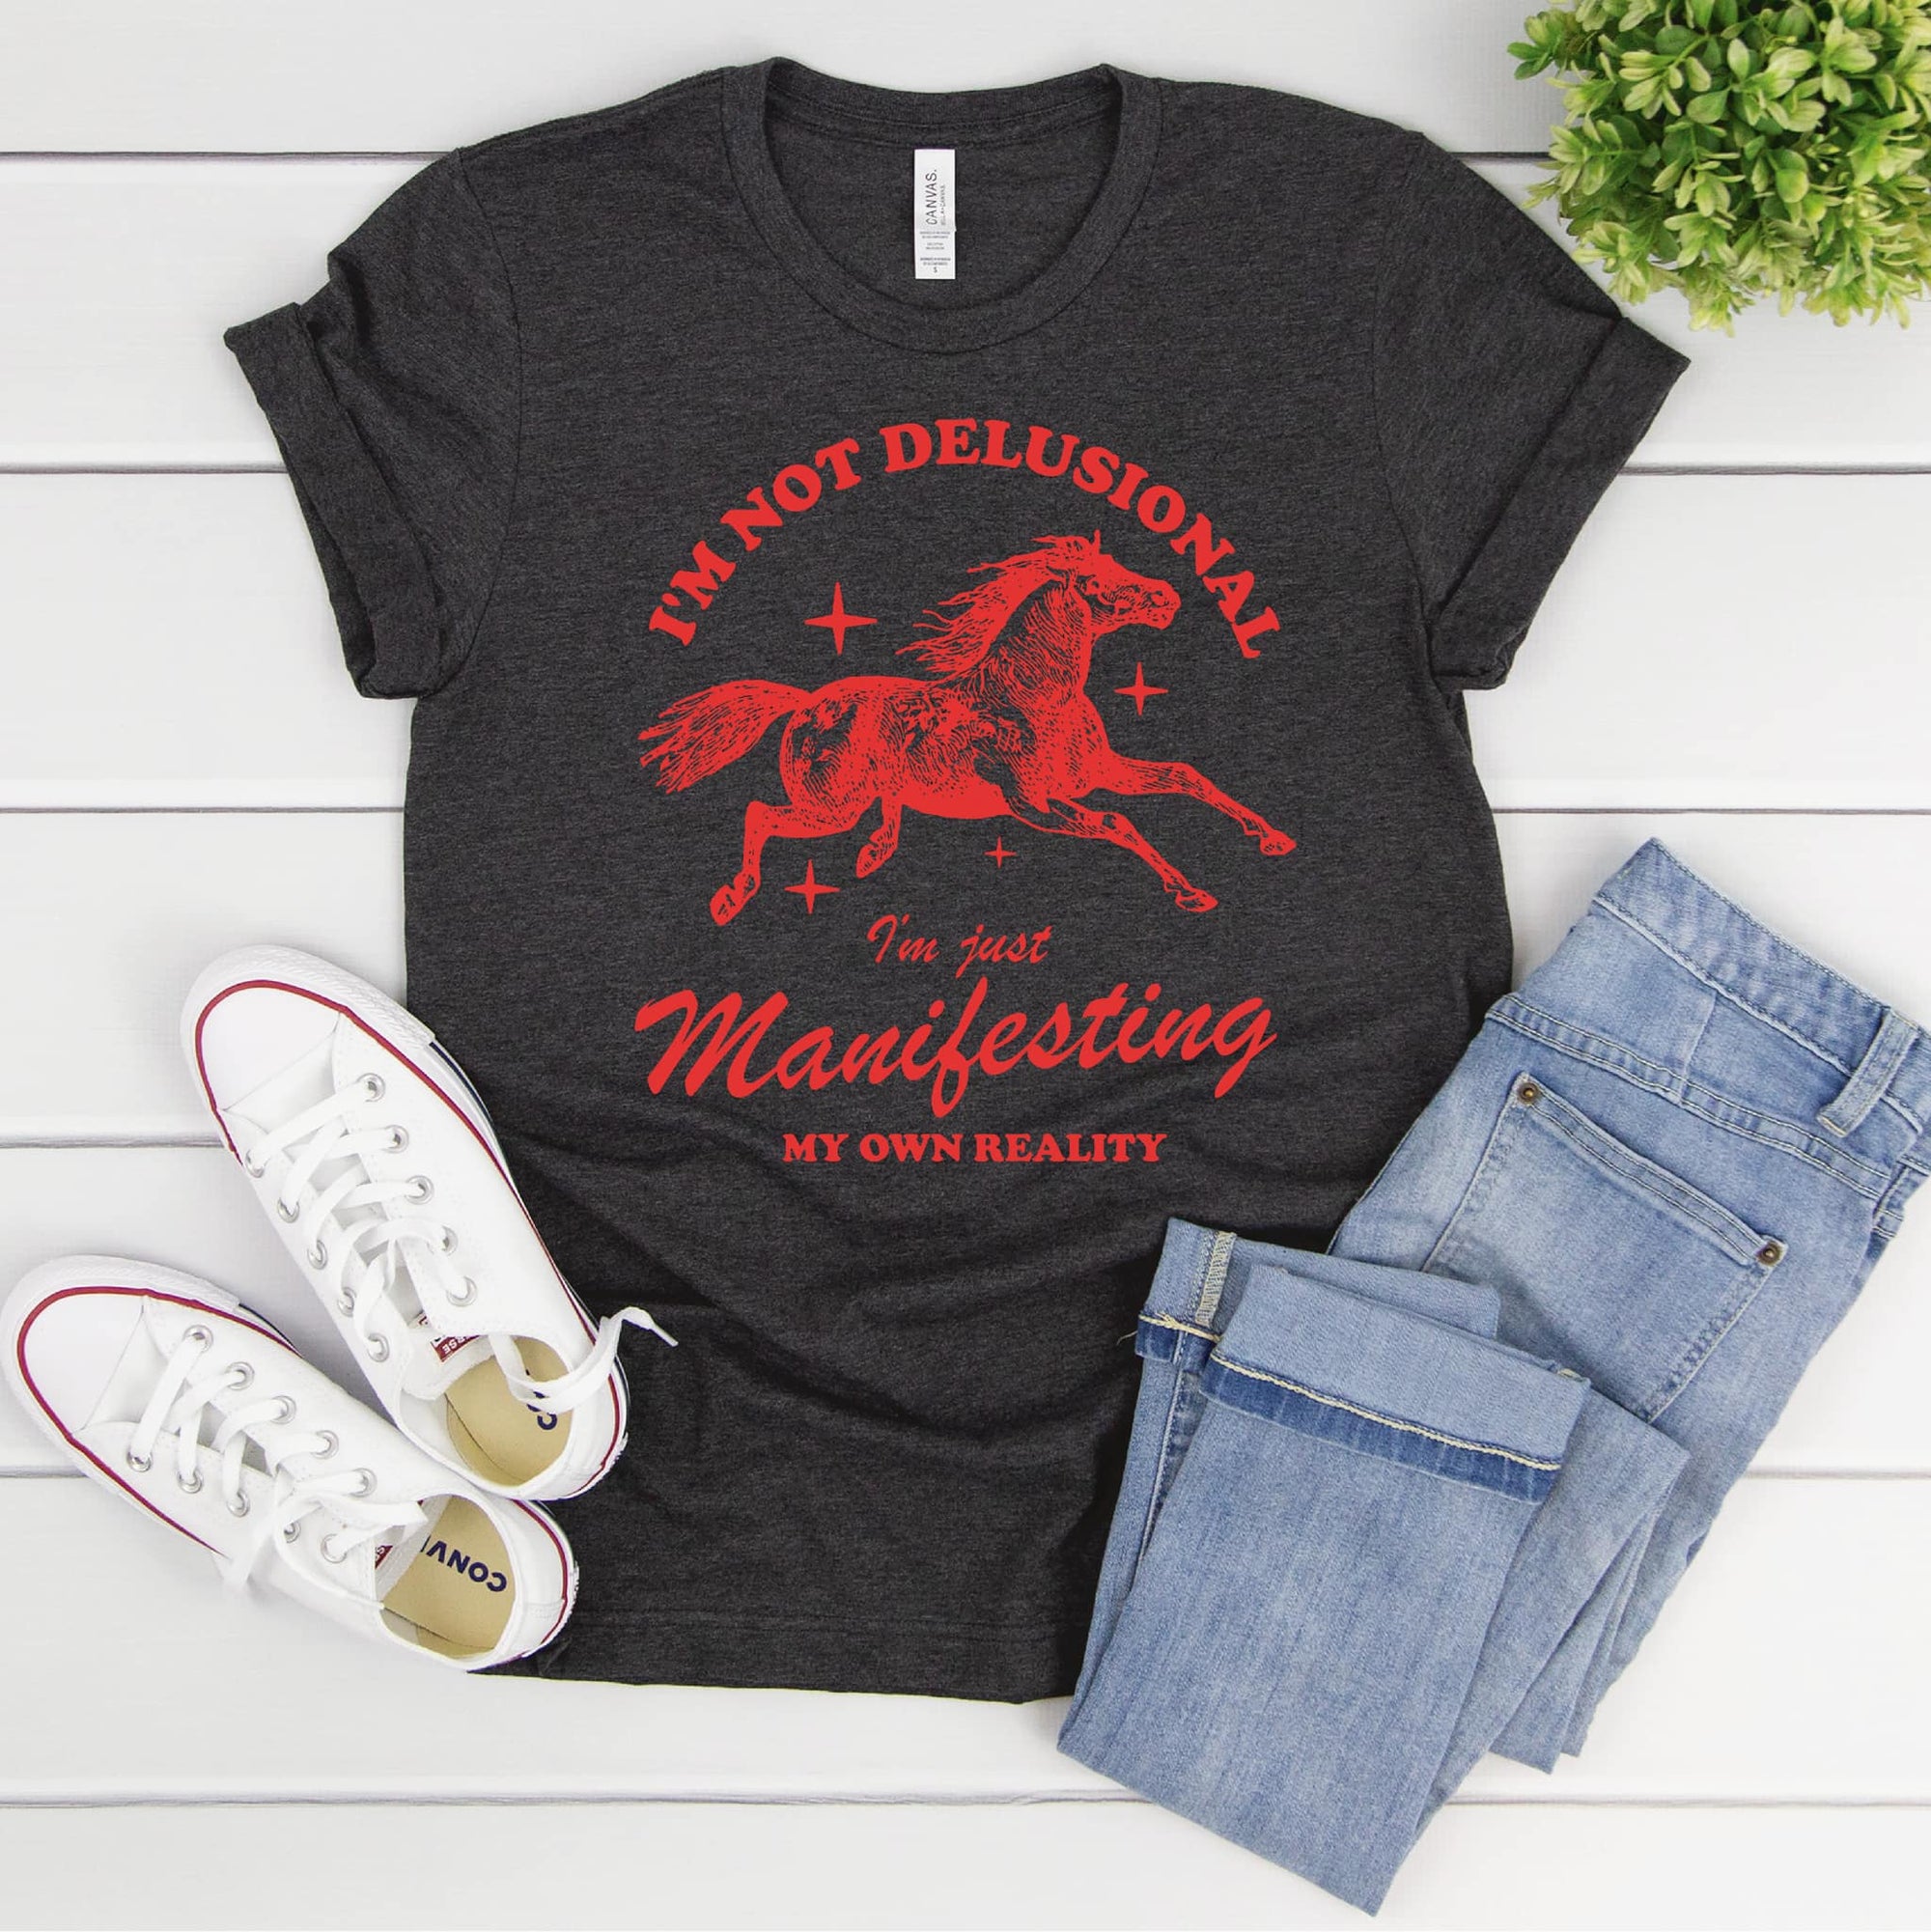 I’m Not Delusional Graphic Tee